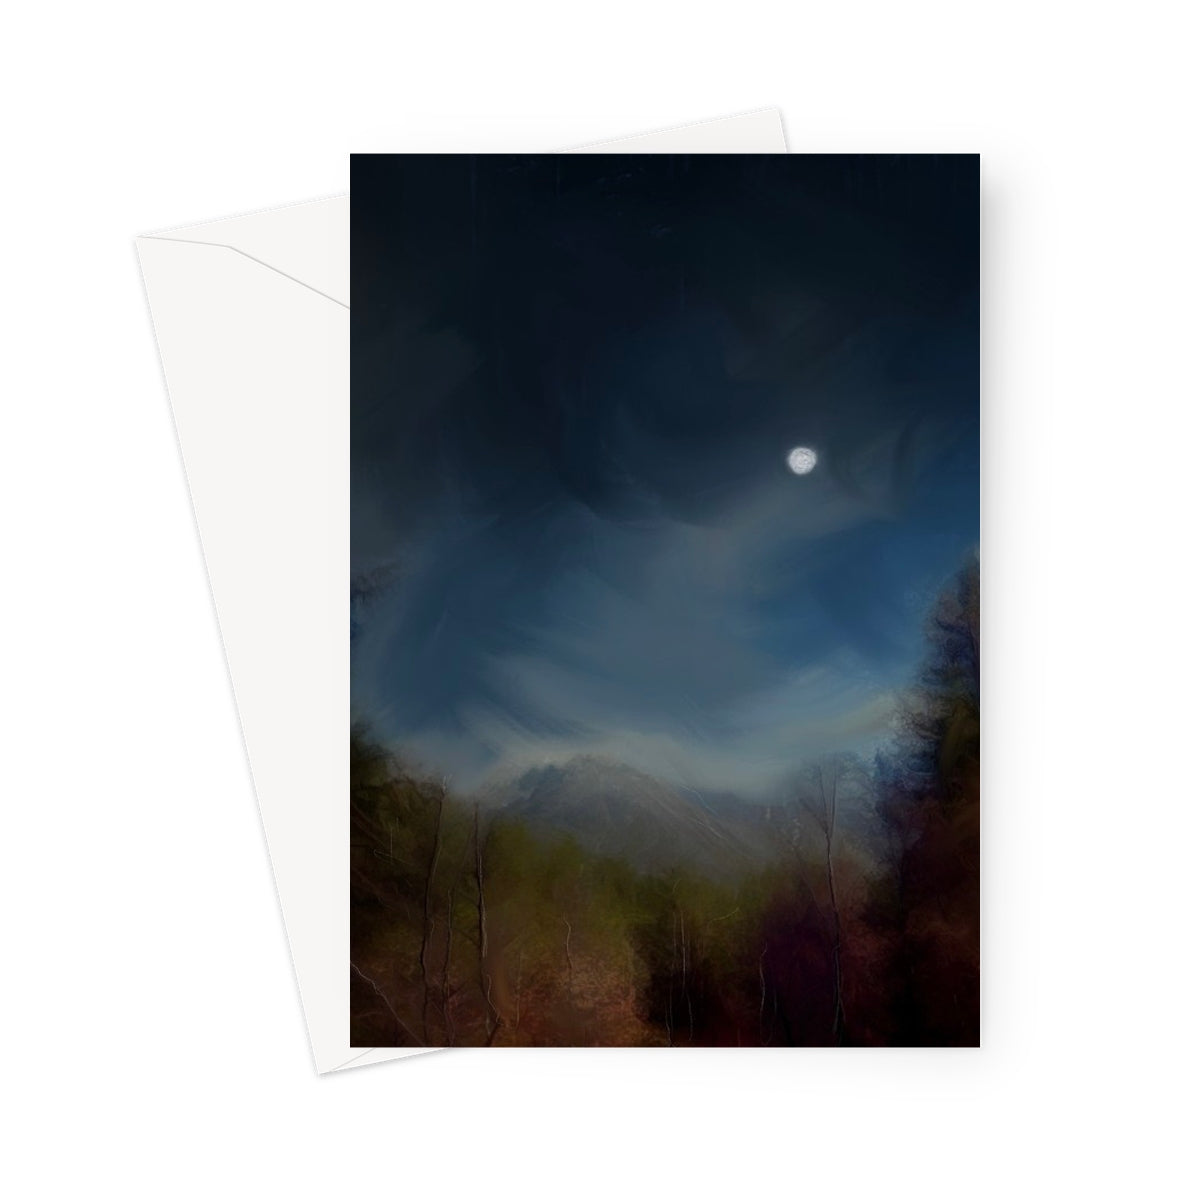 Glencoe Lochan Moonlight Art Gifts Greeting Card-Greetings Cards-Scottish Lochs & Mountains Art Gallery-5"x7"-1 Card-Paintings, Prints, Homeware, Art Gifts From Scotland By Scottish Artist Kevin Hunter